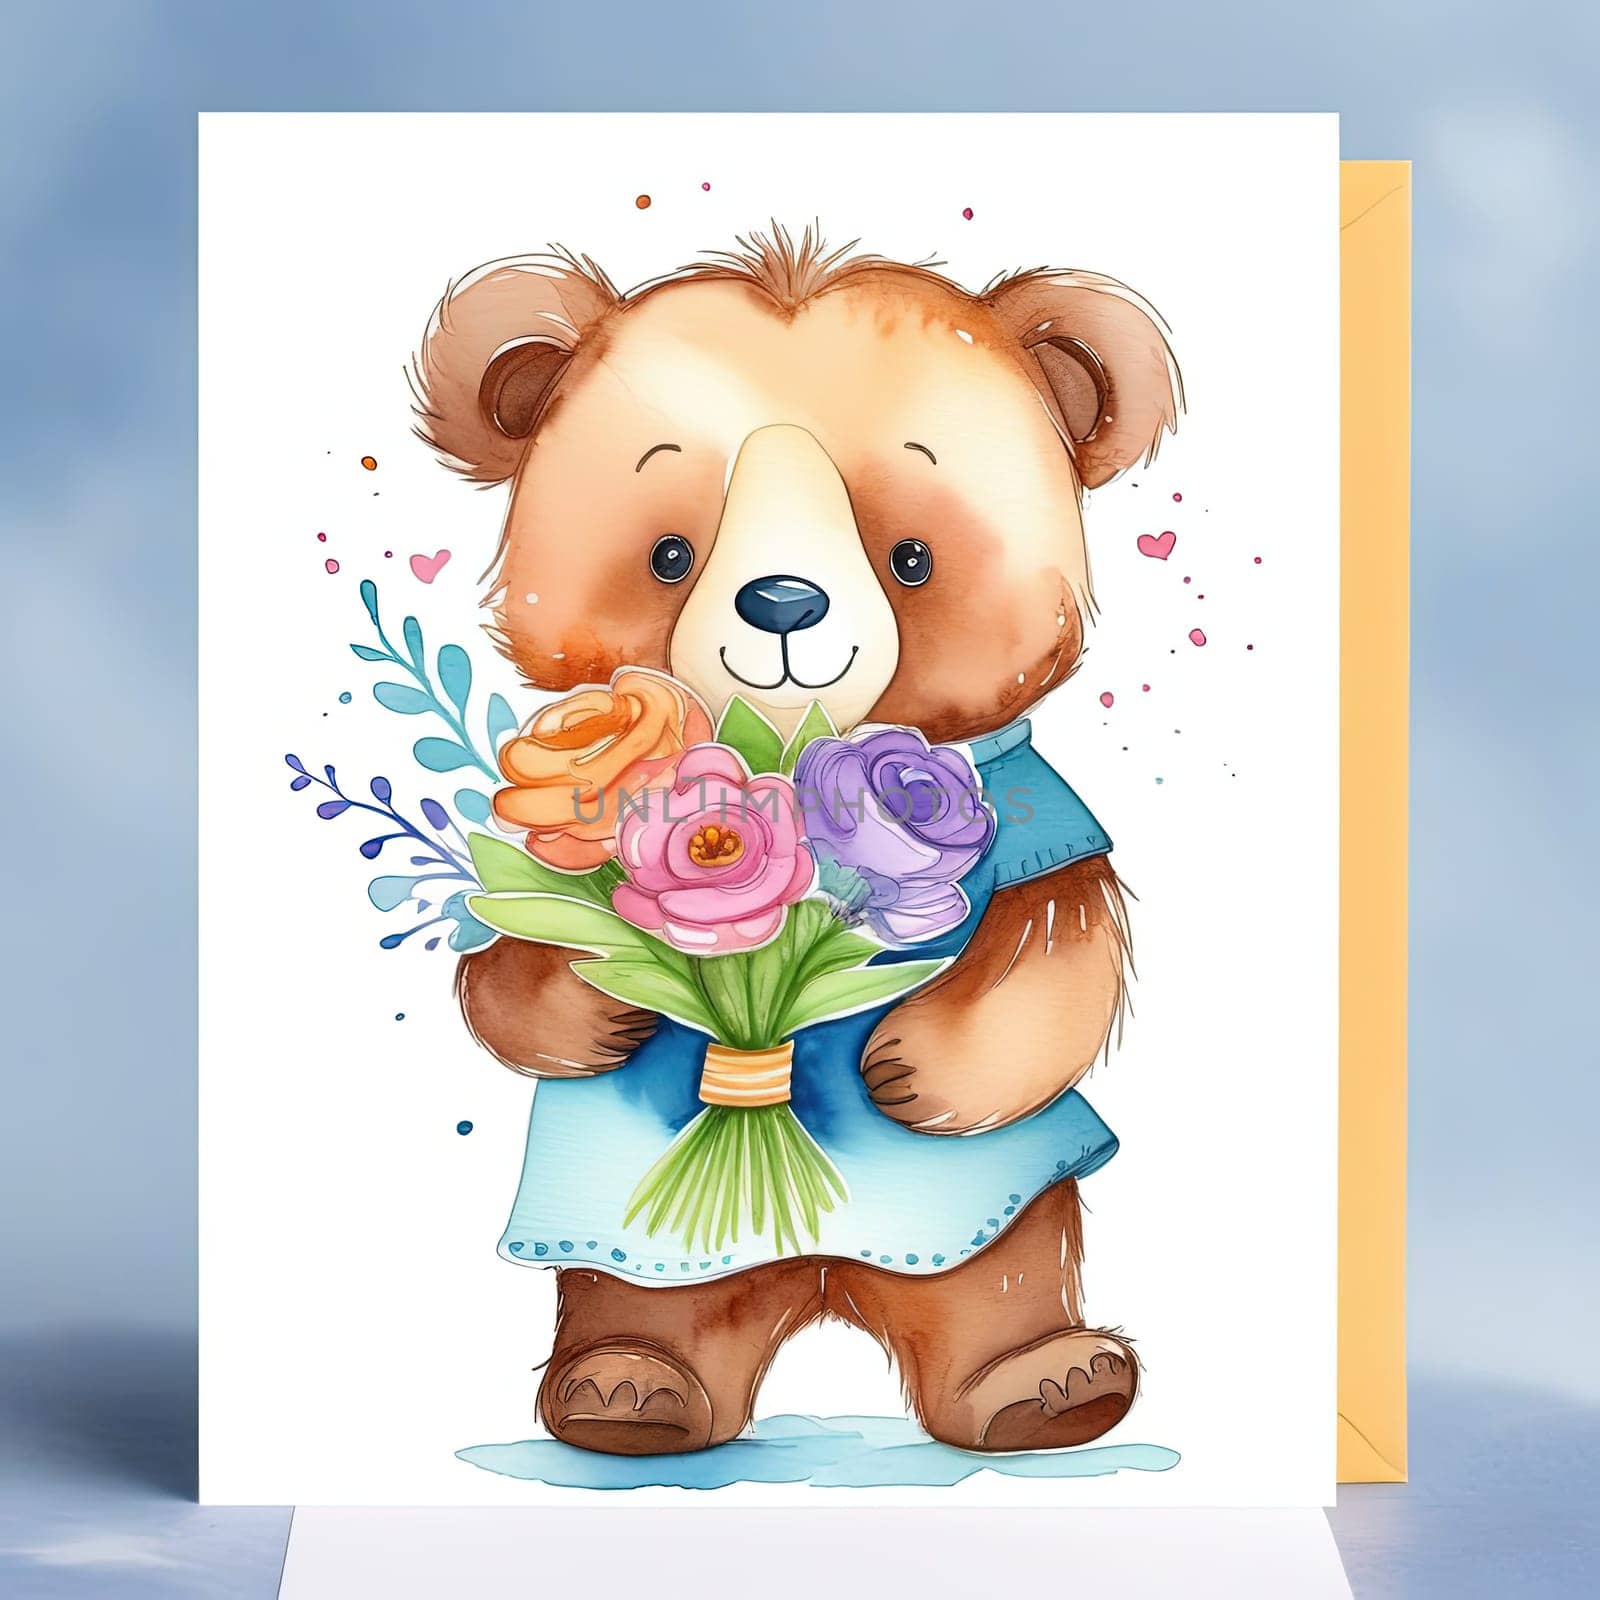 Teddy bear is holding bouquet of flowers isolated on pastel background. Concept of birthday and warmth, affection as teddy bear is symbol of love and comfort. Flowers add touch of beauty, color